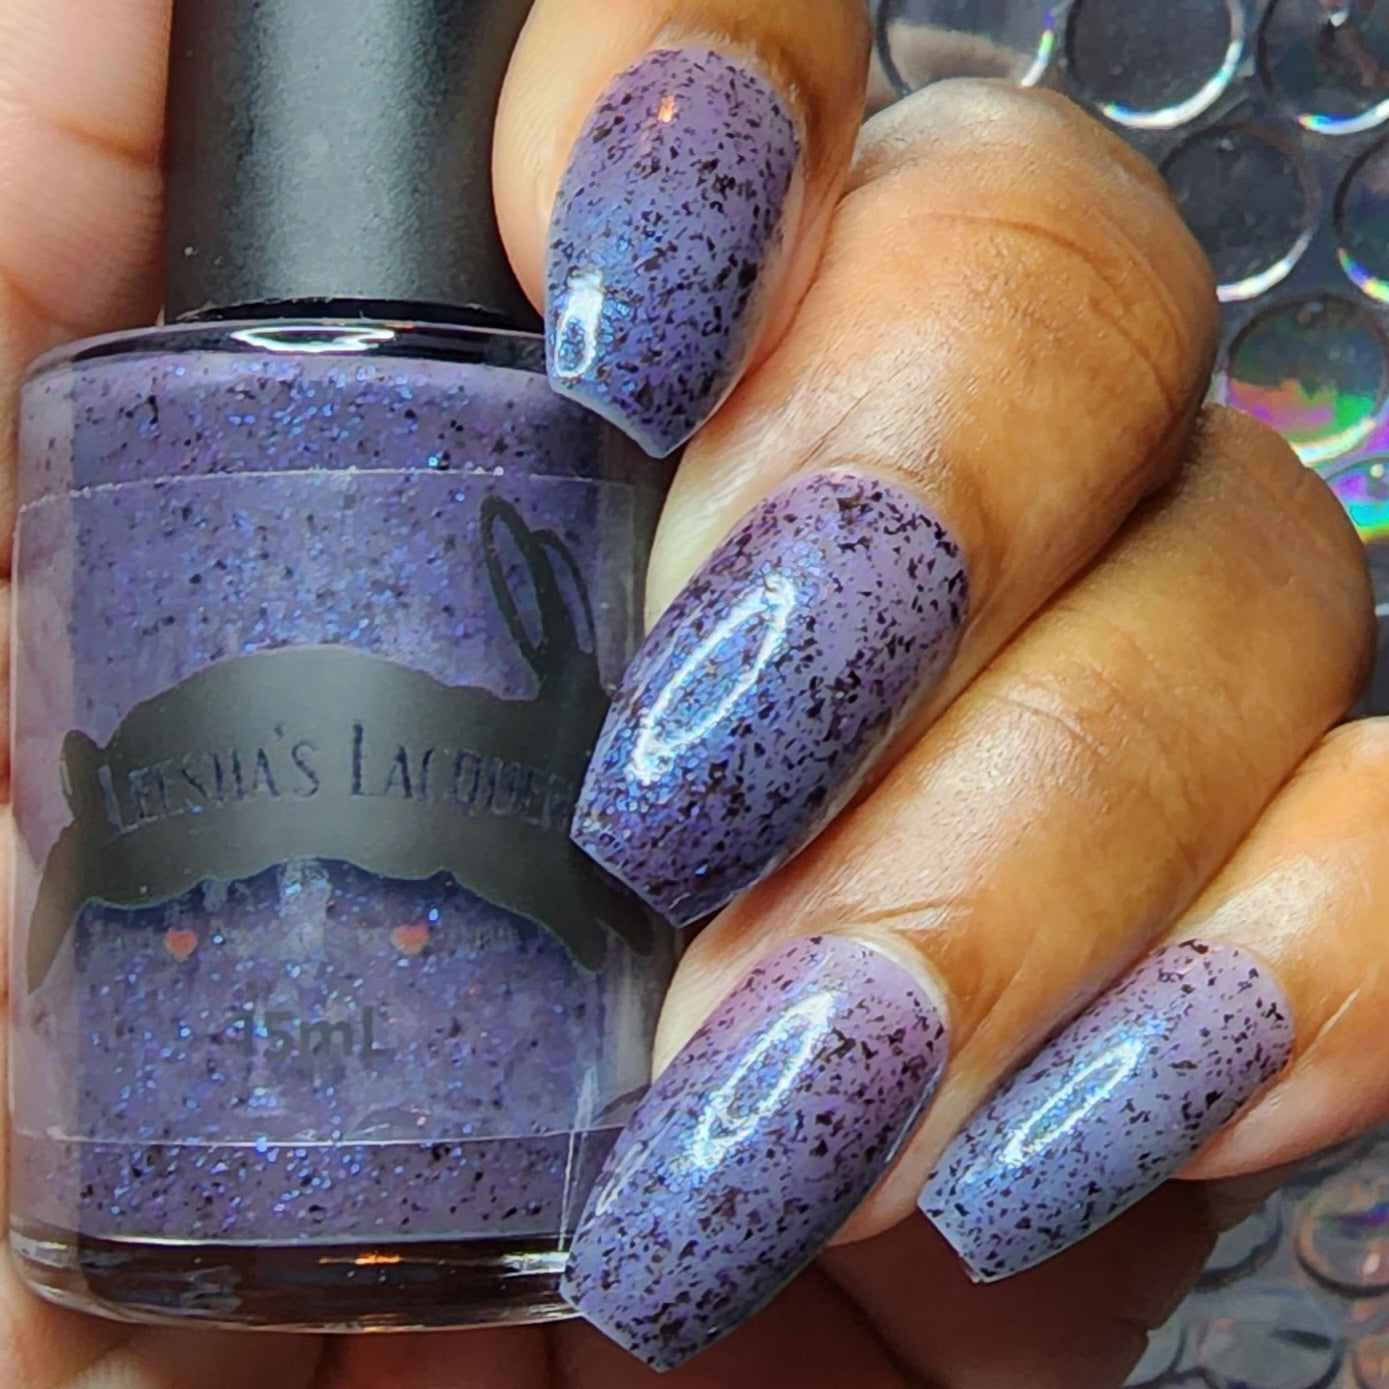 Corpse Reviver (P150) - Purple Glow In The Dark Nail Polish – Maniology